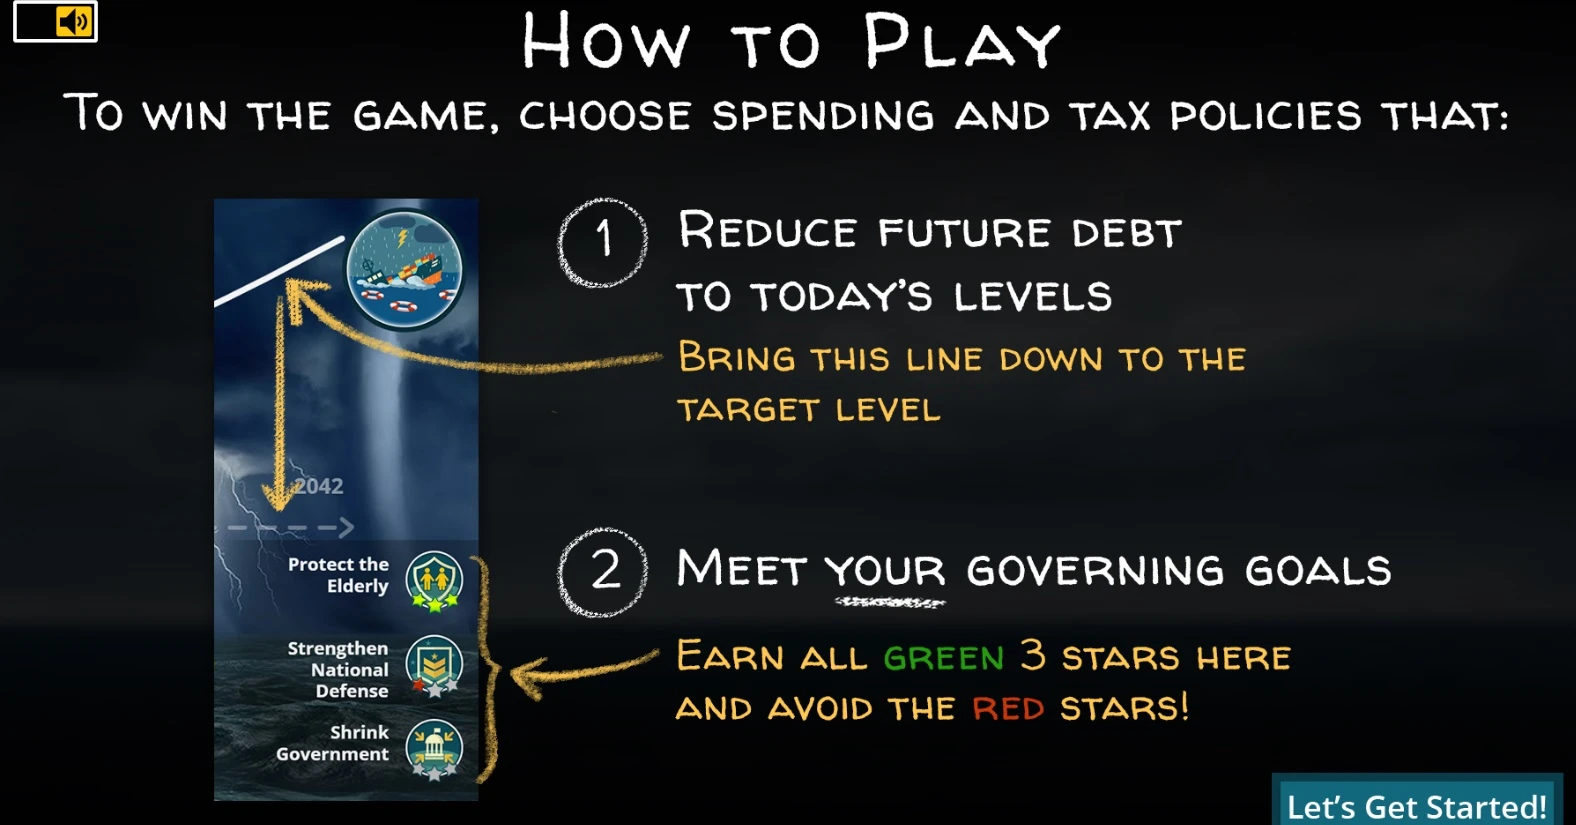 black background How to Play screen asking students to choose spending and tax policies to reduce debt and meet governing goals